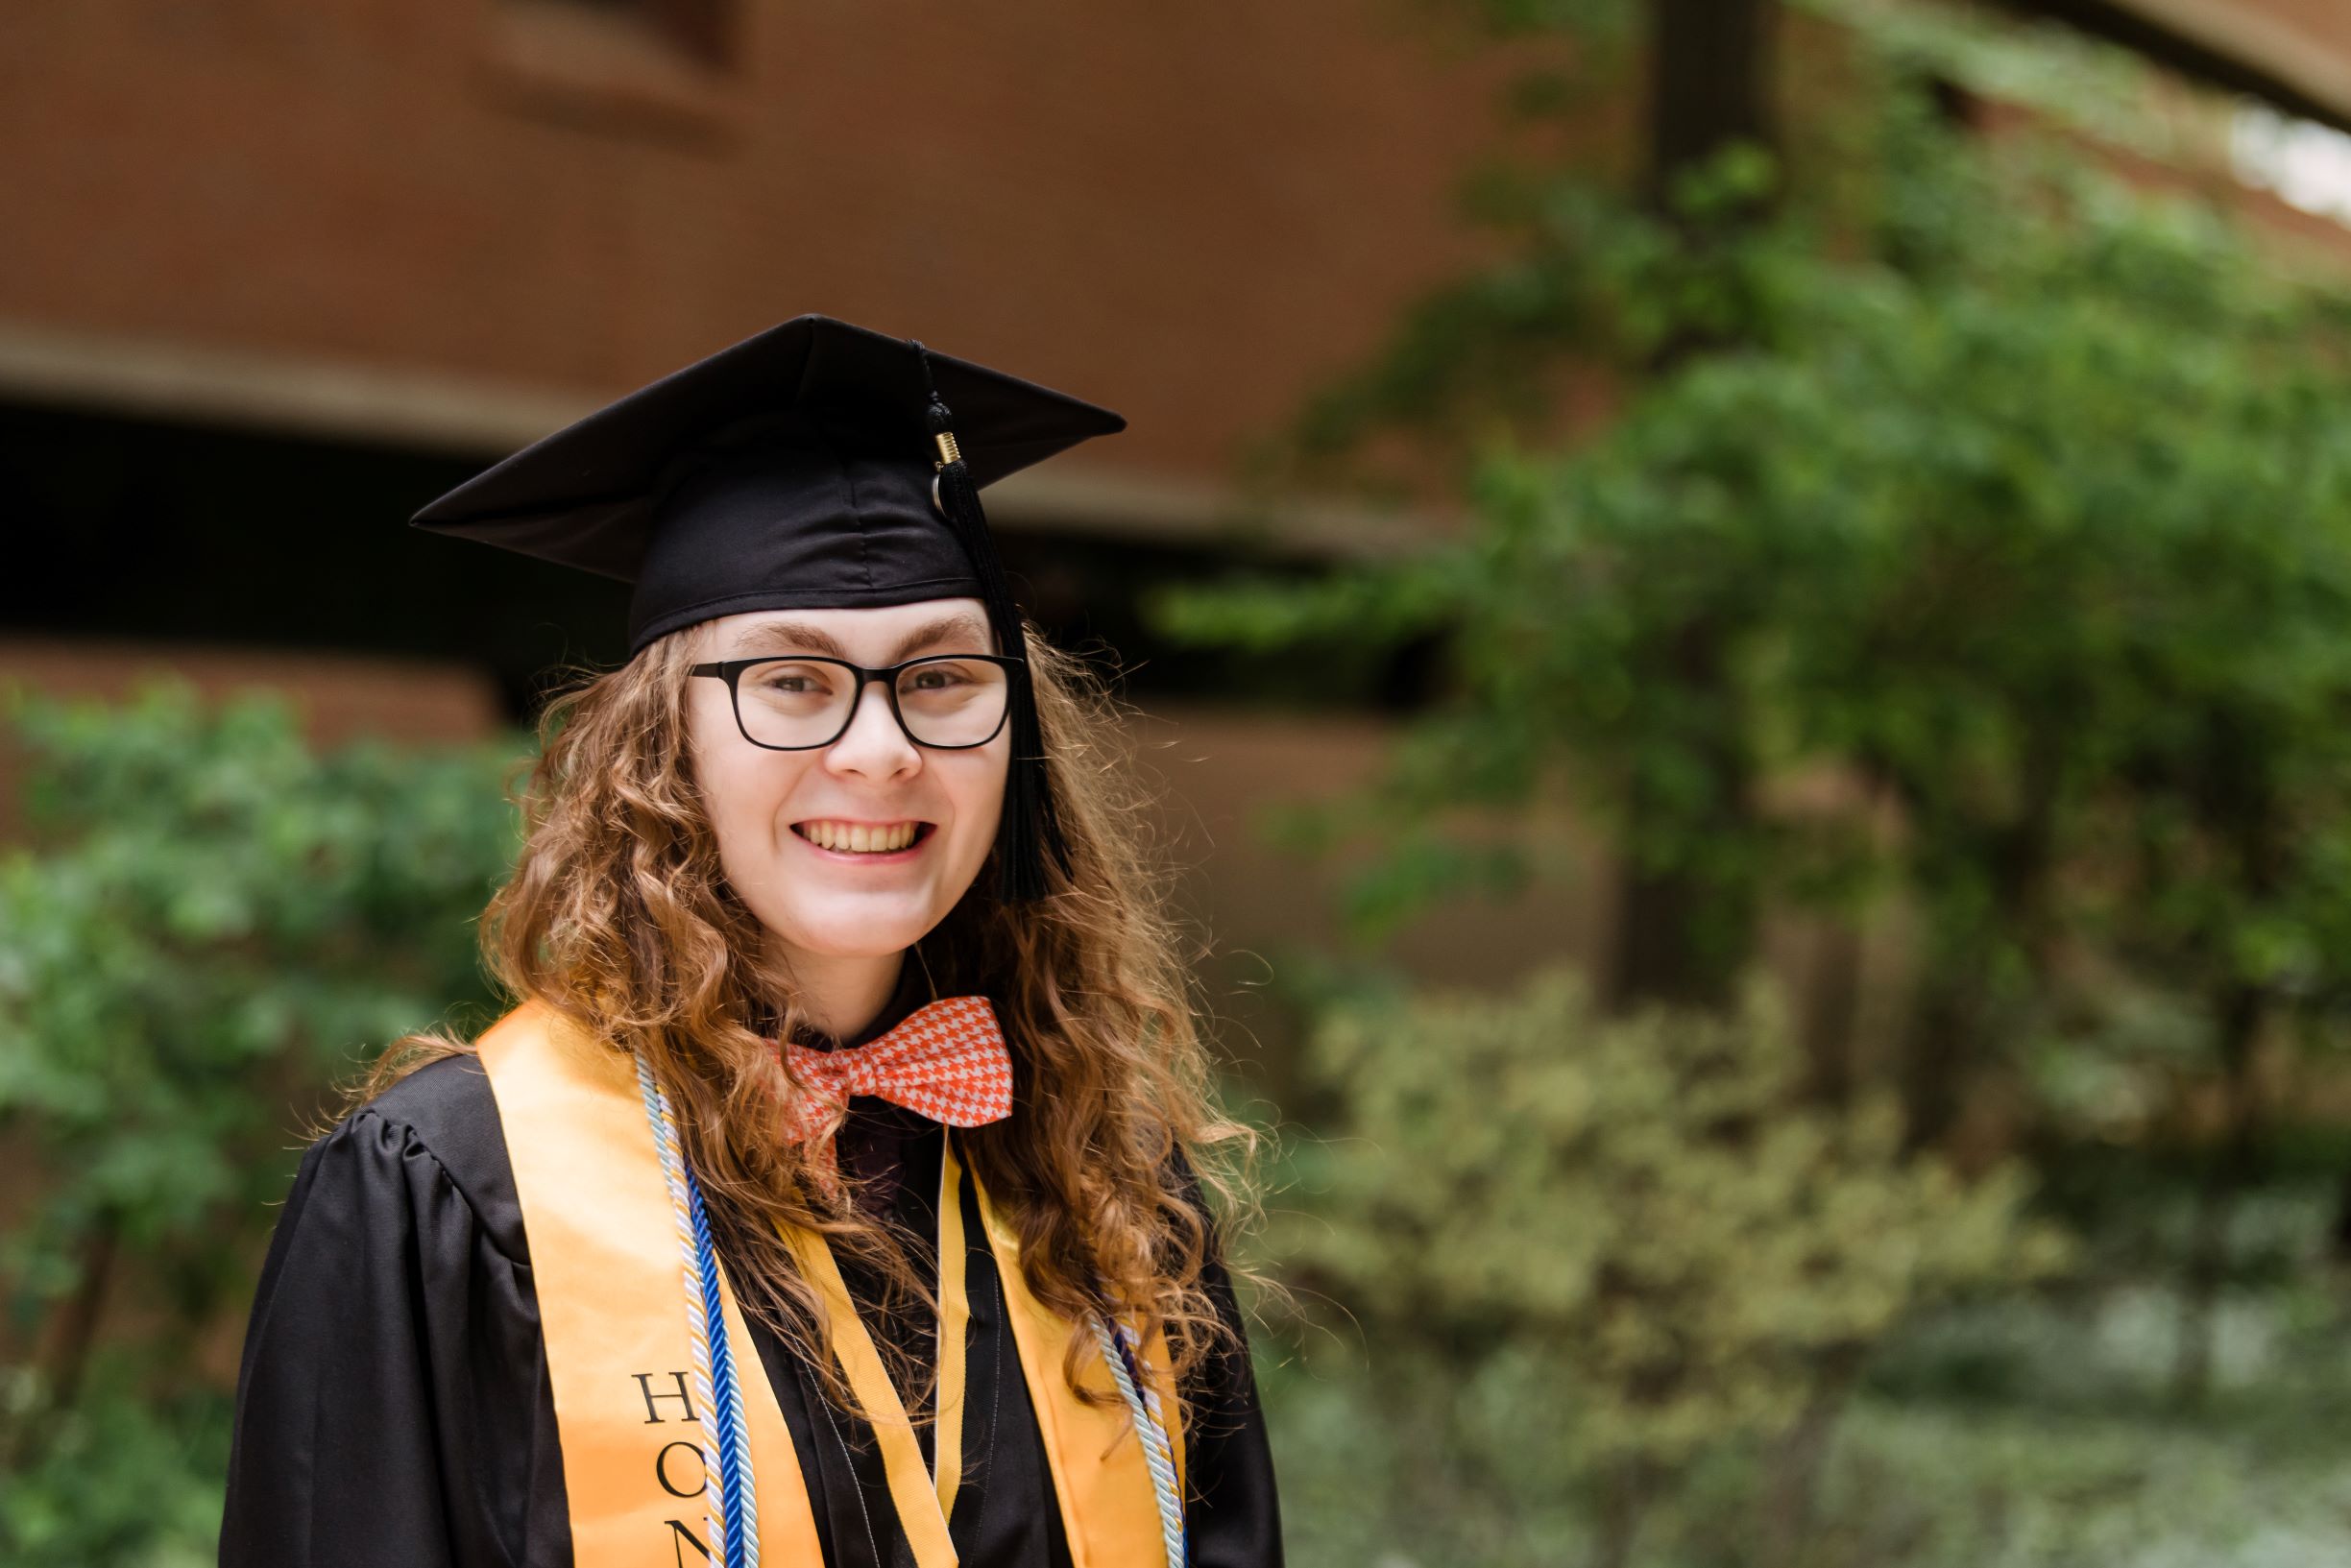 Young adult with long, curly hair smiles for a portrait, wearing graduation regalia and a bow tie.